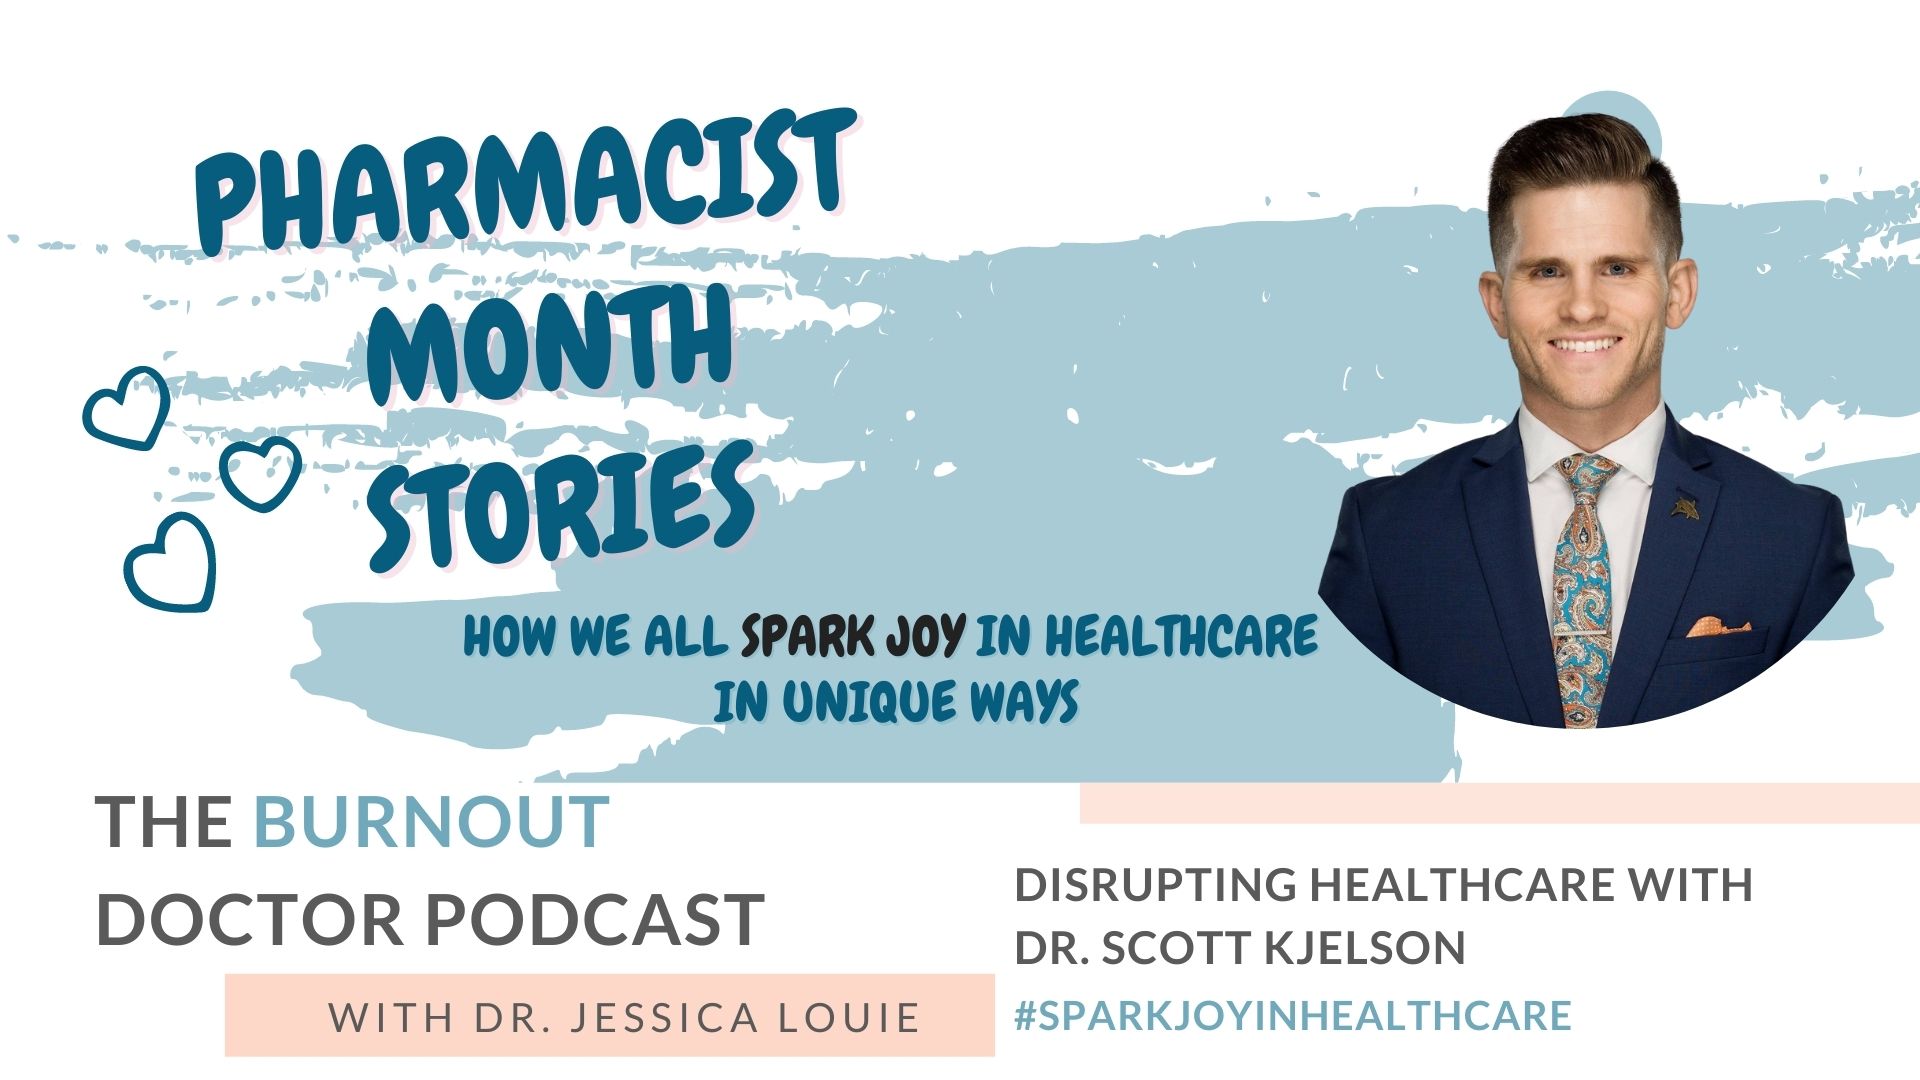 Dr. Scott Kjelson on The Burnout Doctor Podcast. Pharmacist burnout stories with Dr. Jessica Louie. Your Pharmacist Advocate. Spark Joy in Healthcare. Joy at Work. KonMari Simplifying in healthcare. Disruptive Host Podcast.